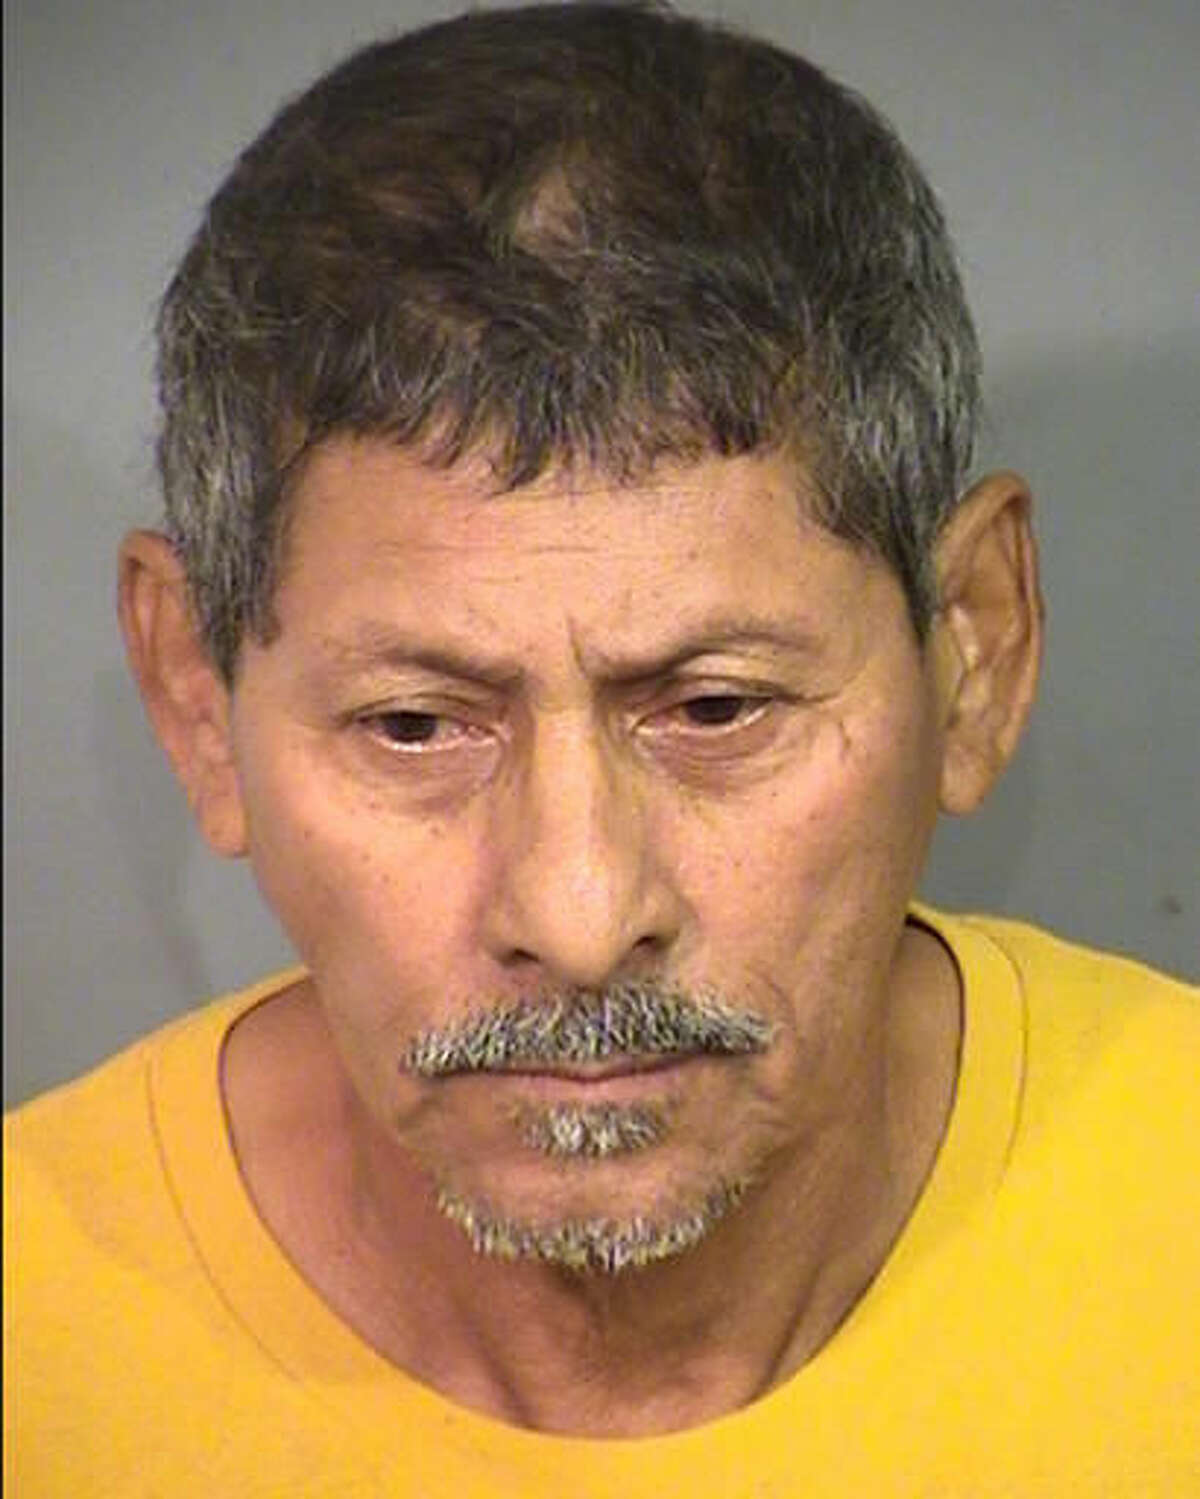 This undated photo provided by the Clark County Detention Center shows Jose Azucena, 63, of Las Vegas, Nev. Police say Azucena was arrested Nov. 12, 2016, in Henderson, Nev., and jailed pending court appearances on child kidnapping, sexual assault and lewdness charges. Azucena is accused of luring neighboring children into his apartment with promises of candy. (Clark County Detention Center via AP)